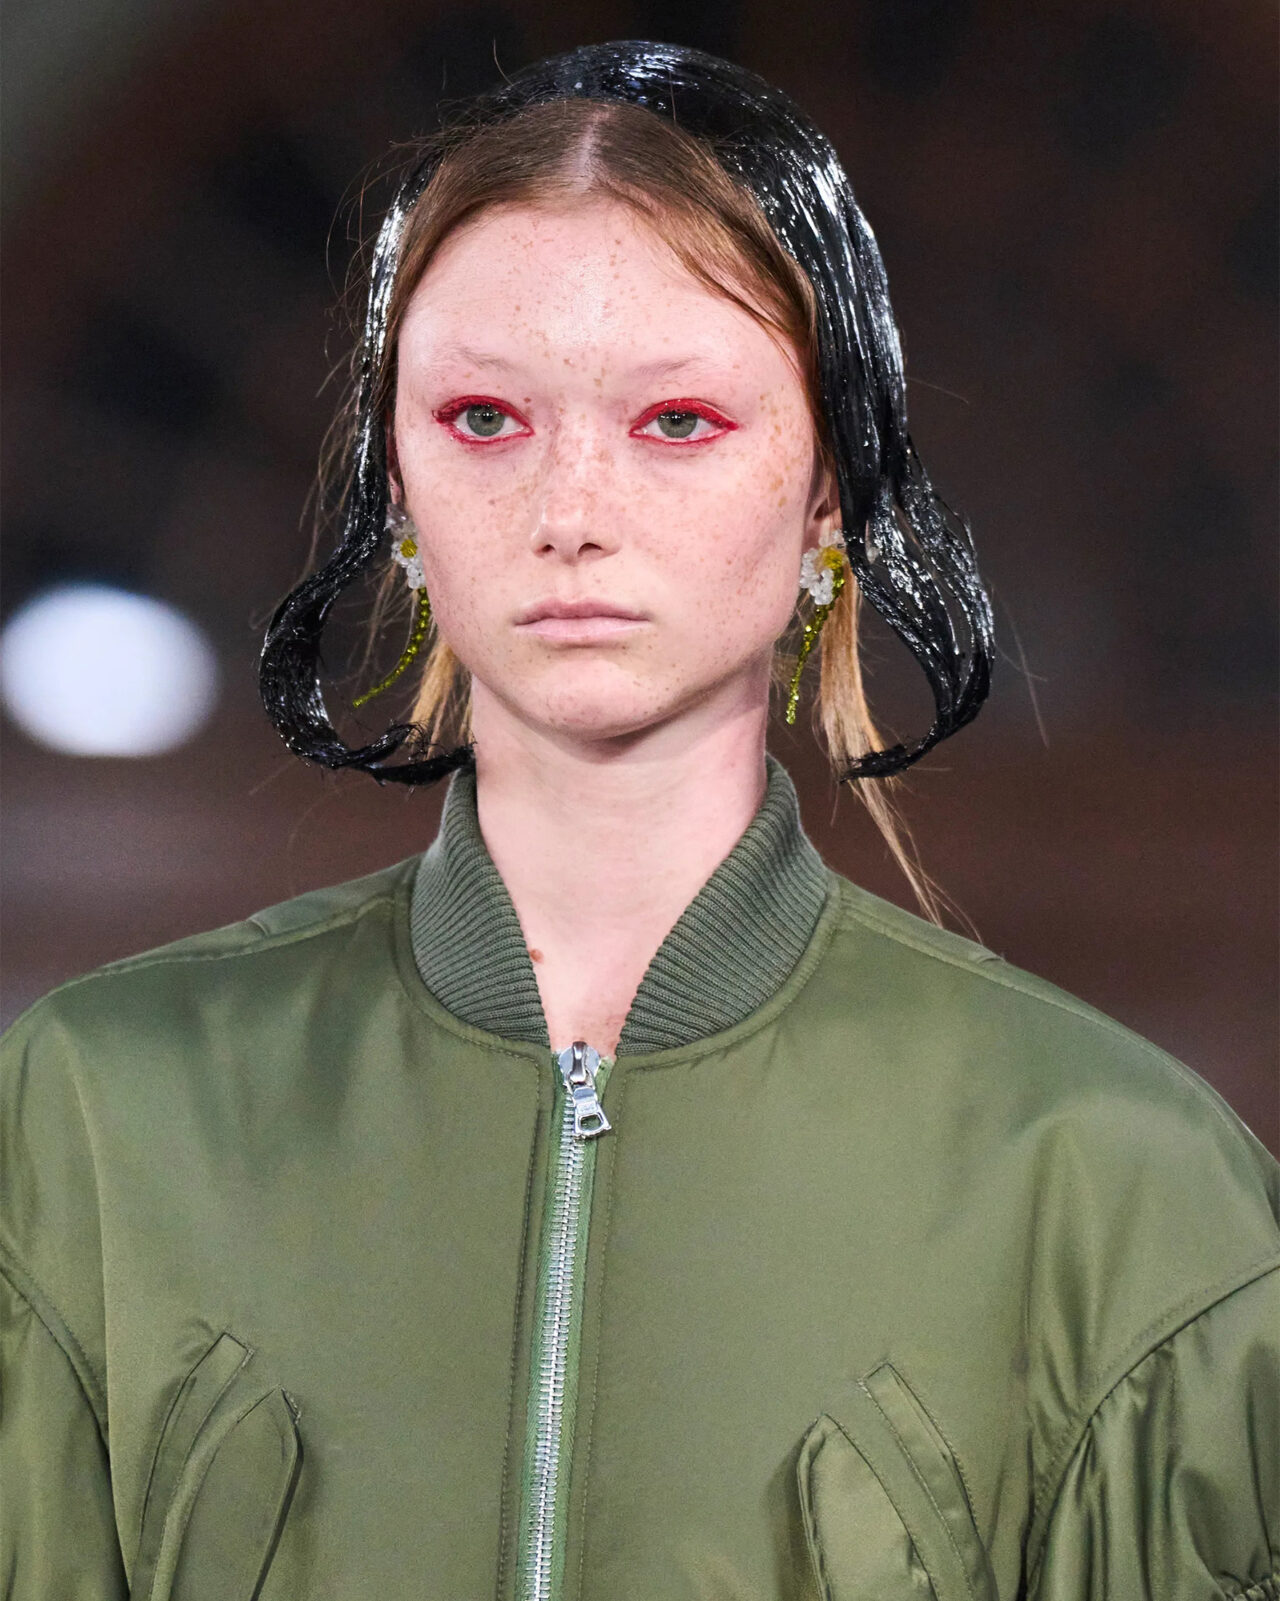 Catwalk Confidential: 4 Beauty Trends For a Fresh Spring-Summer Outlook ...